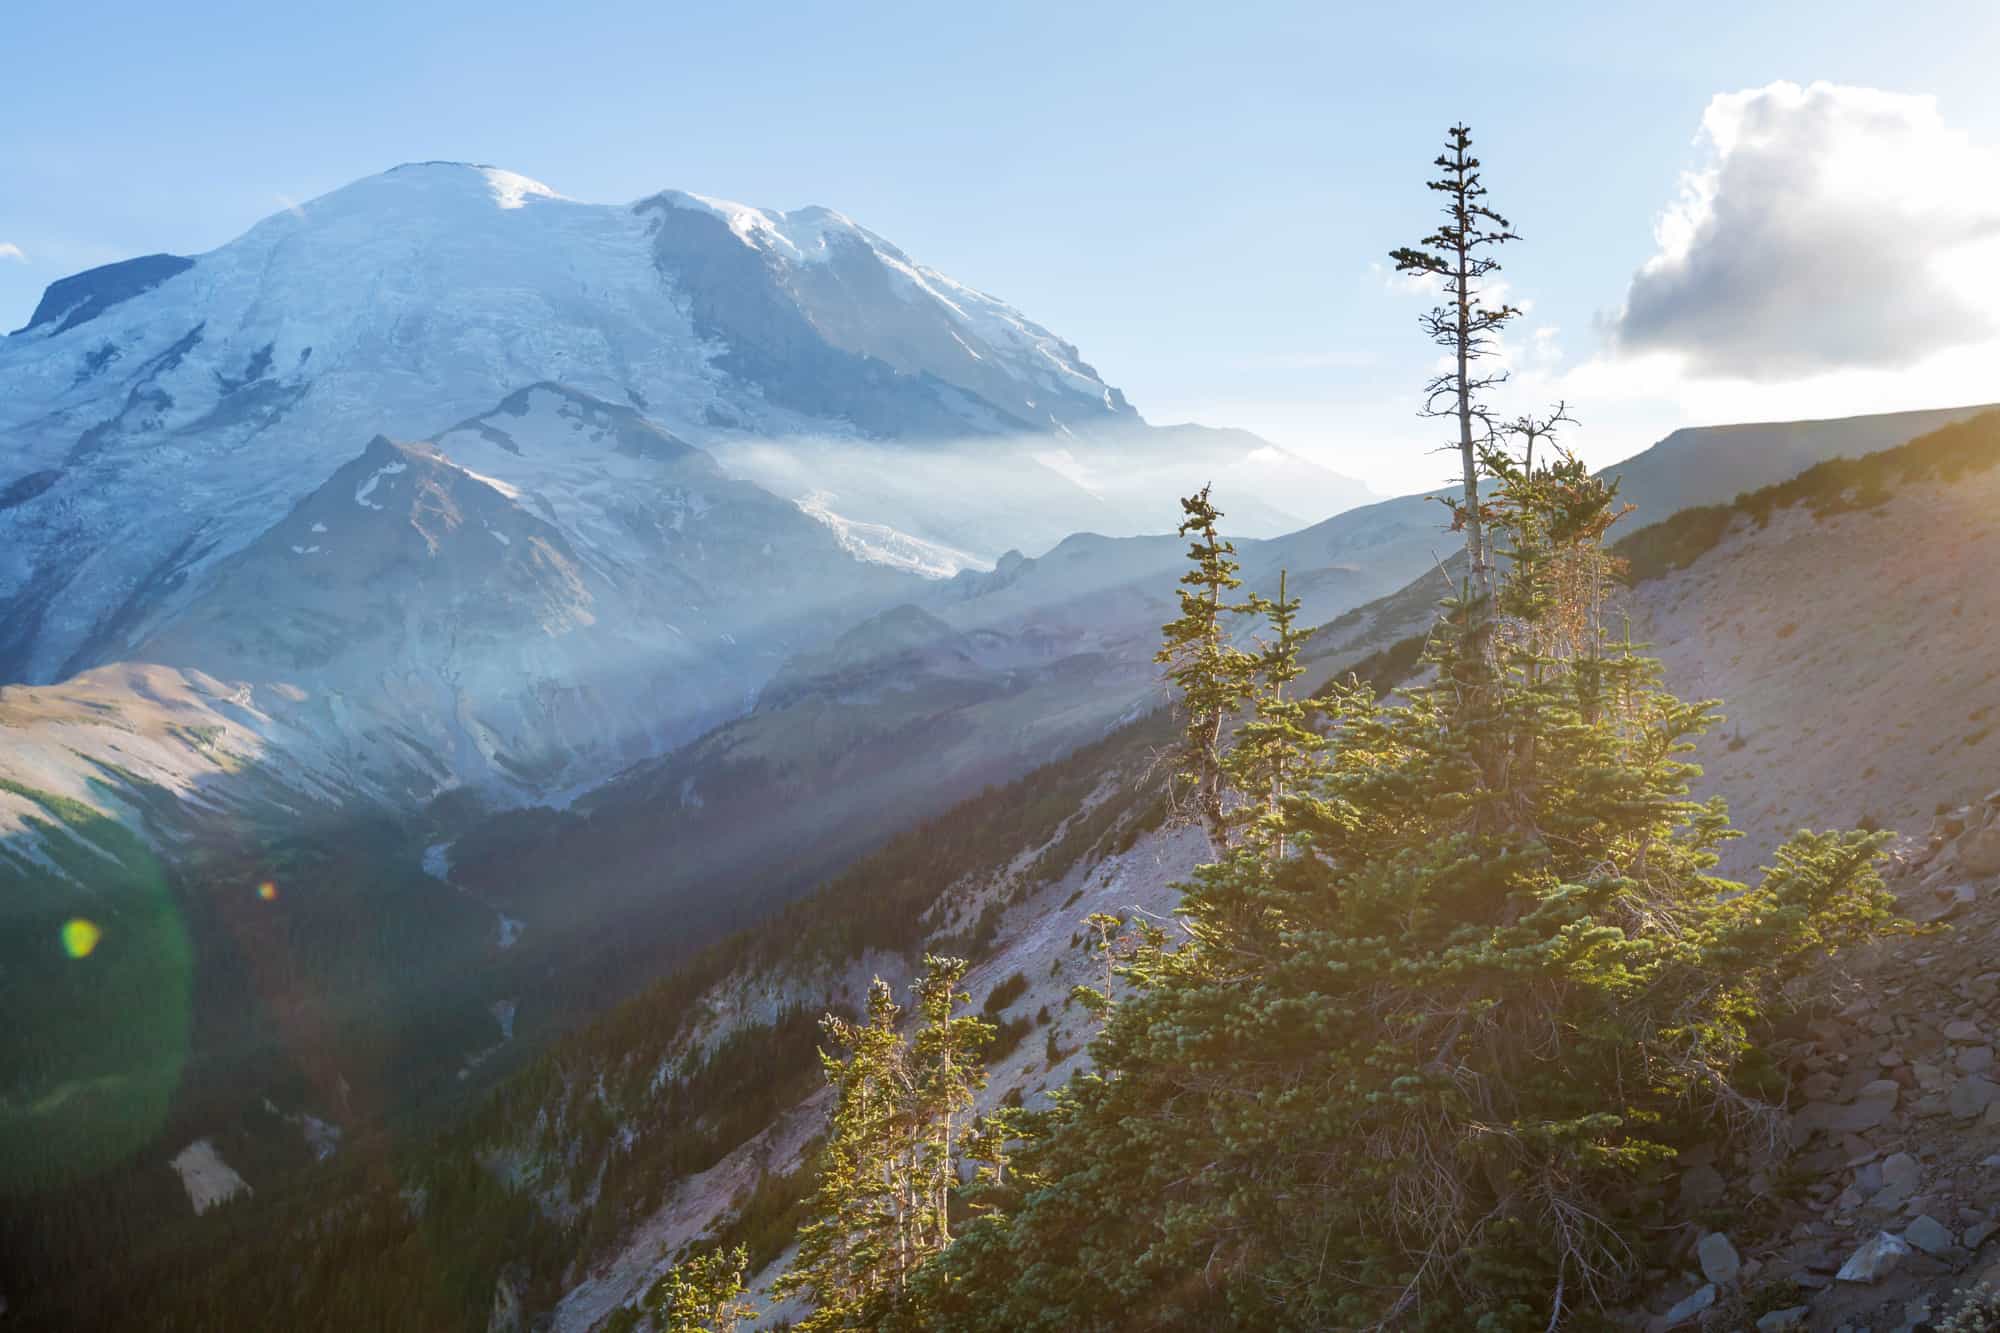 a close up of mount rainier from high within the park, the sunlight from the right is creating sunbeams across the image